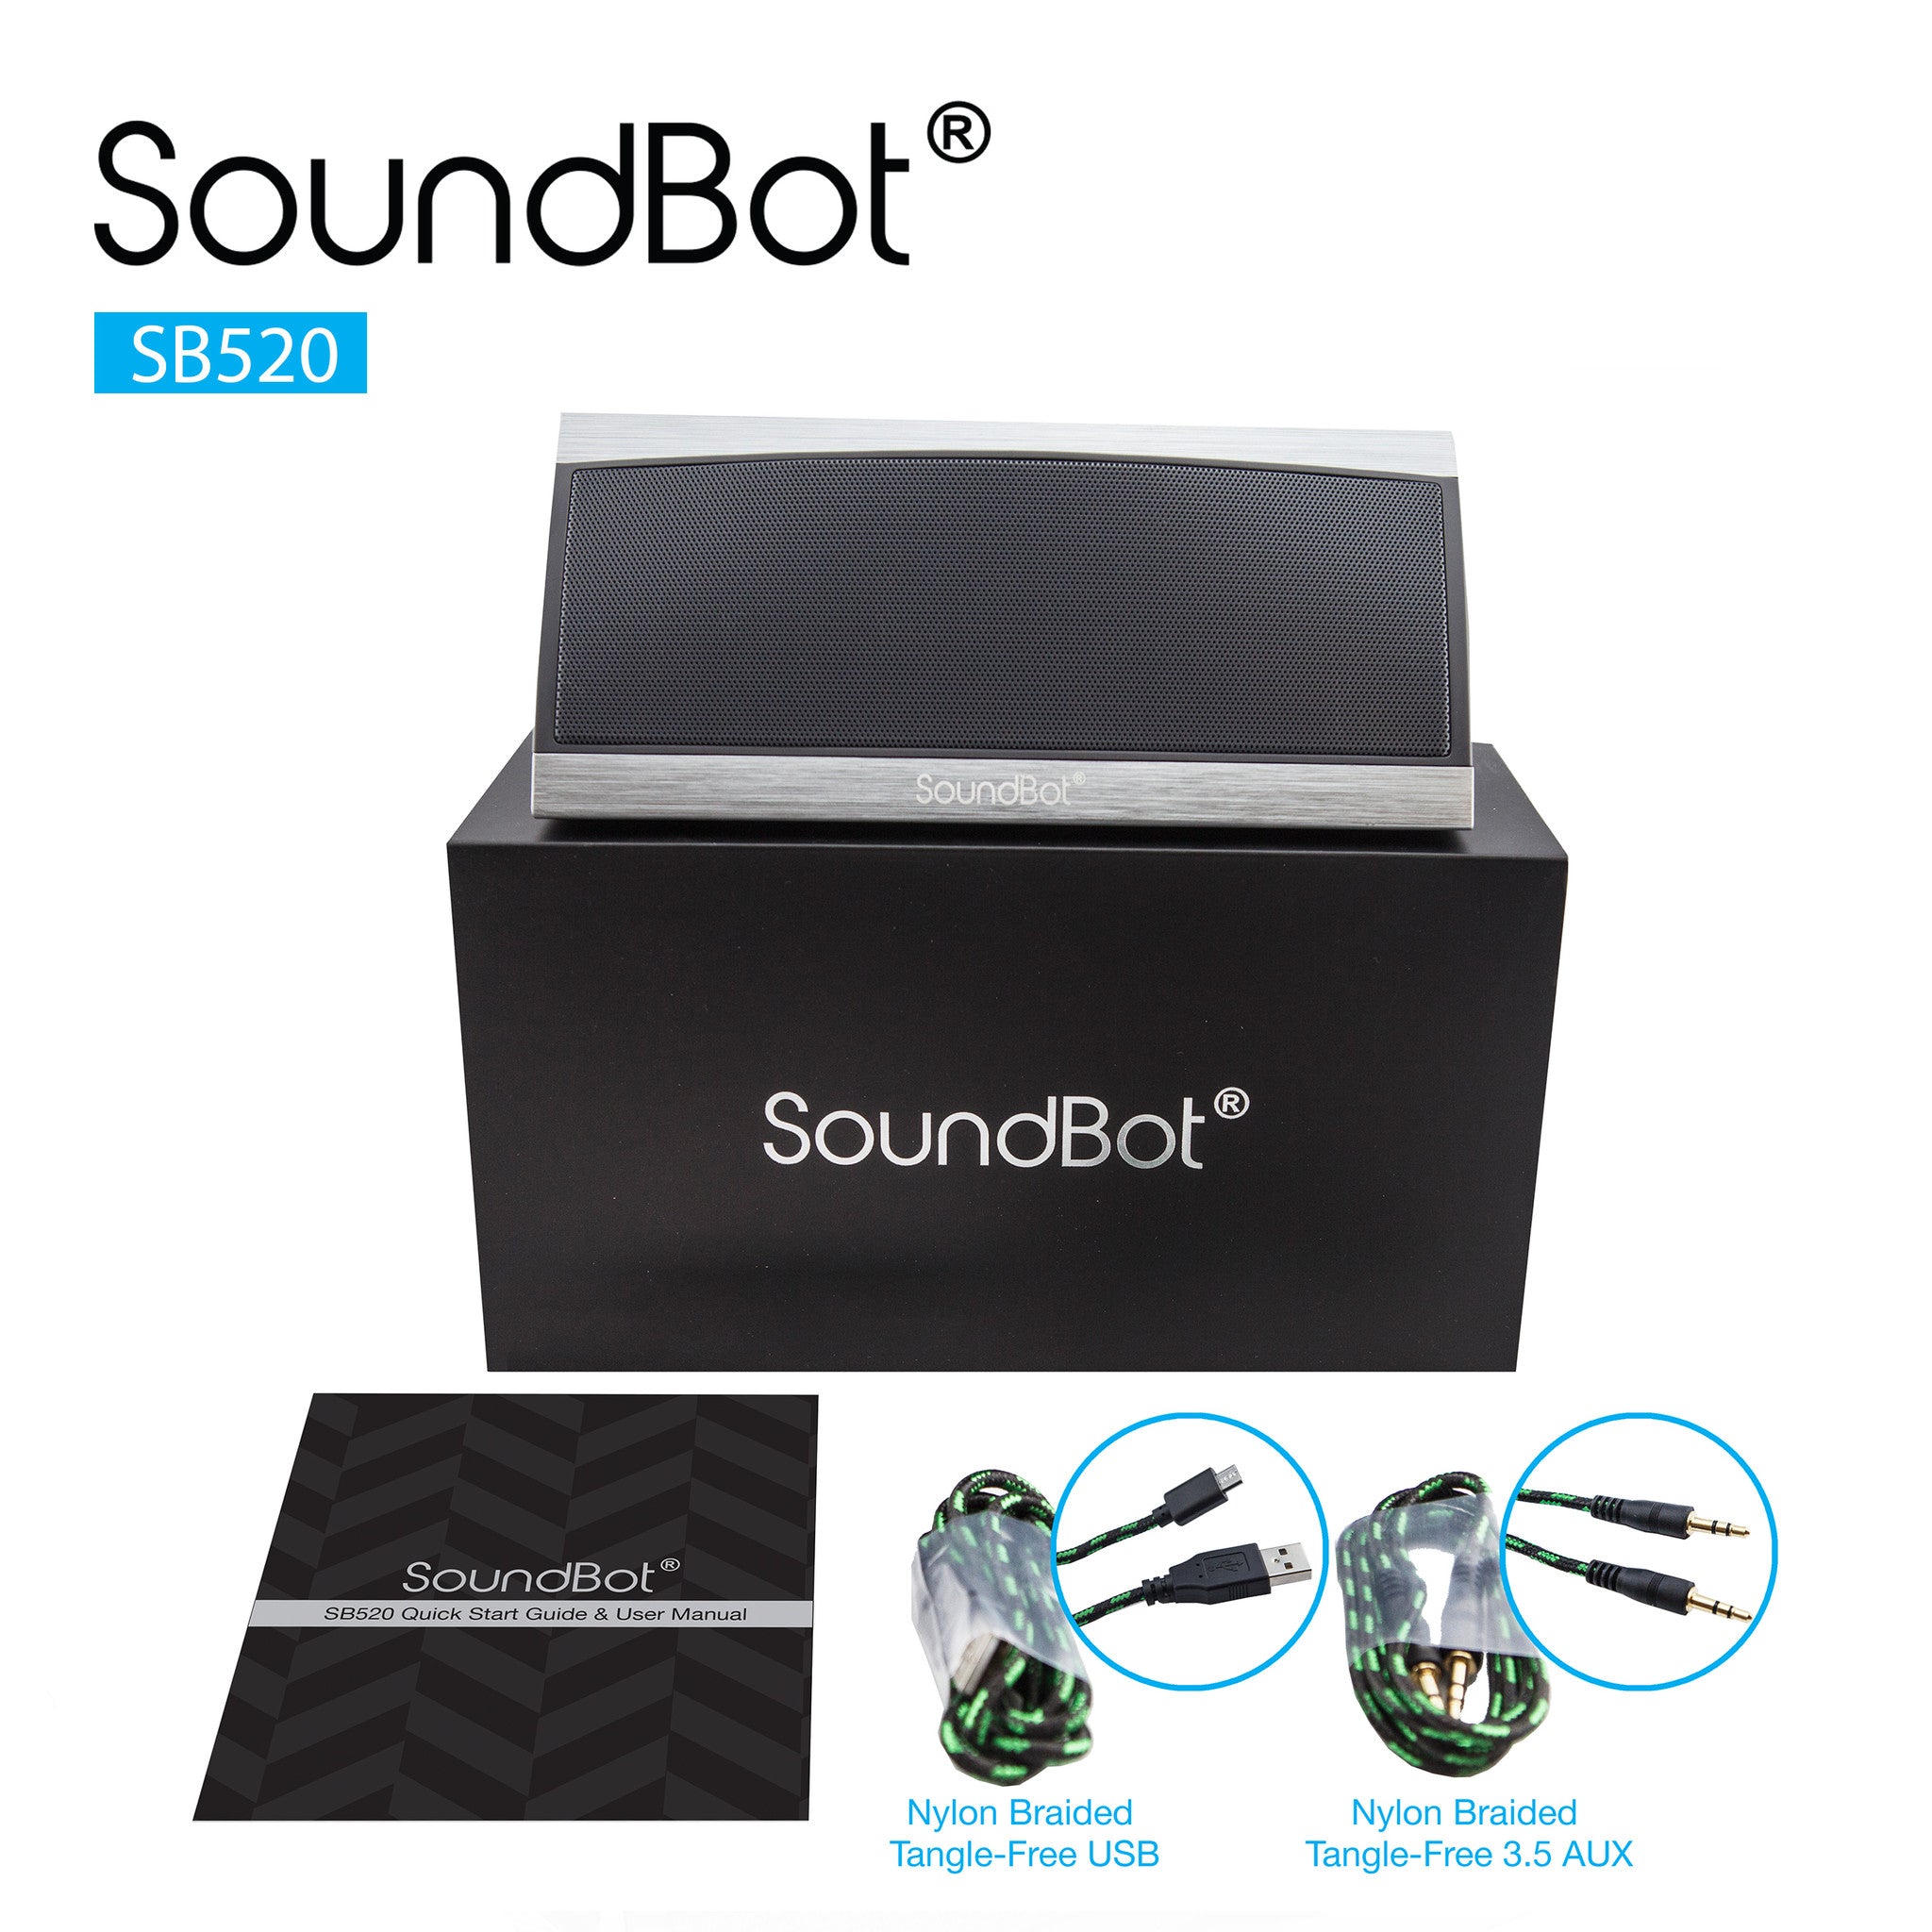 SoundBot® SB520 3D HD Bluetooth 4.0 Wireless Speaker for 15 hrs Music Streaming & Hands-Free Calling w/ Passive sub woofer, 5W + 5W 50mm Driver Speakerphone, Built-in Mic, 3.5mm Audio Port, 2200mAh Lithium-ion Rechargeable Battery for Indoor & Outdoor Use